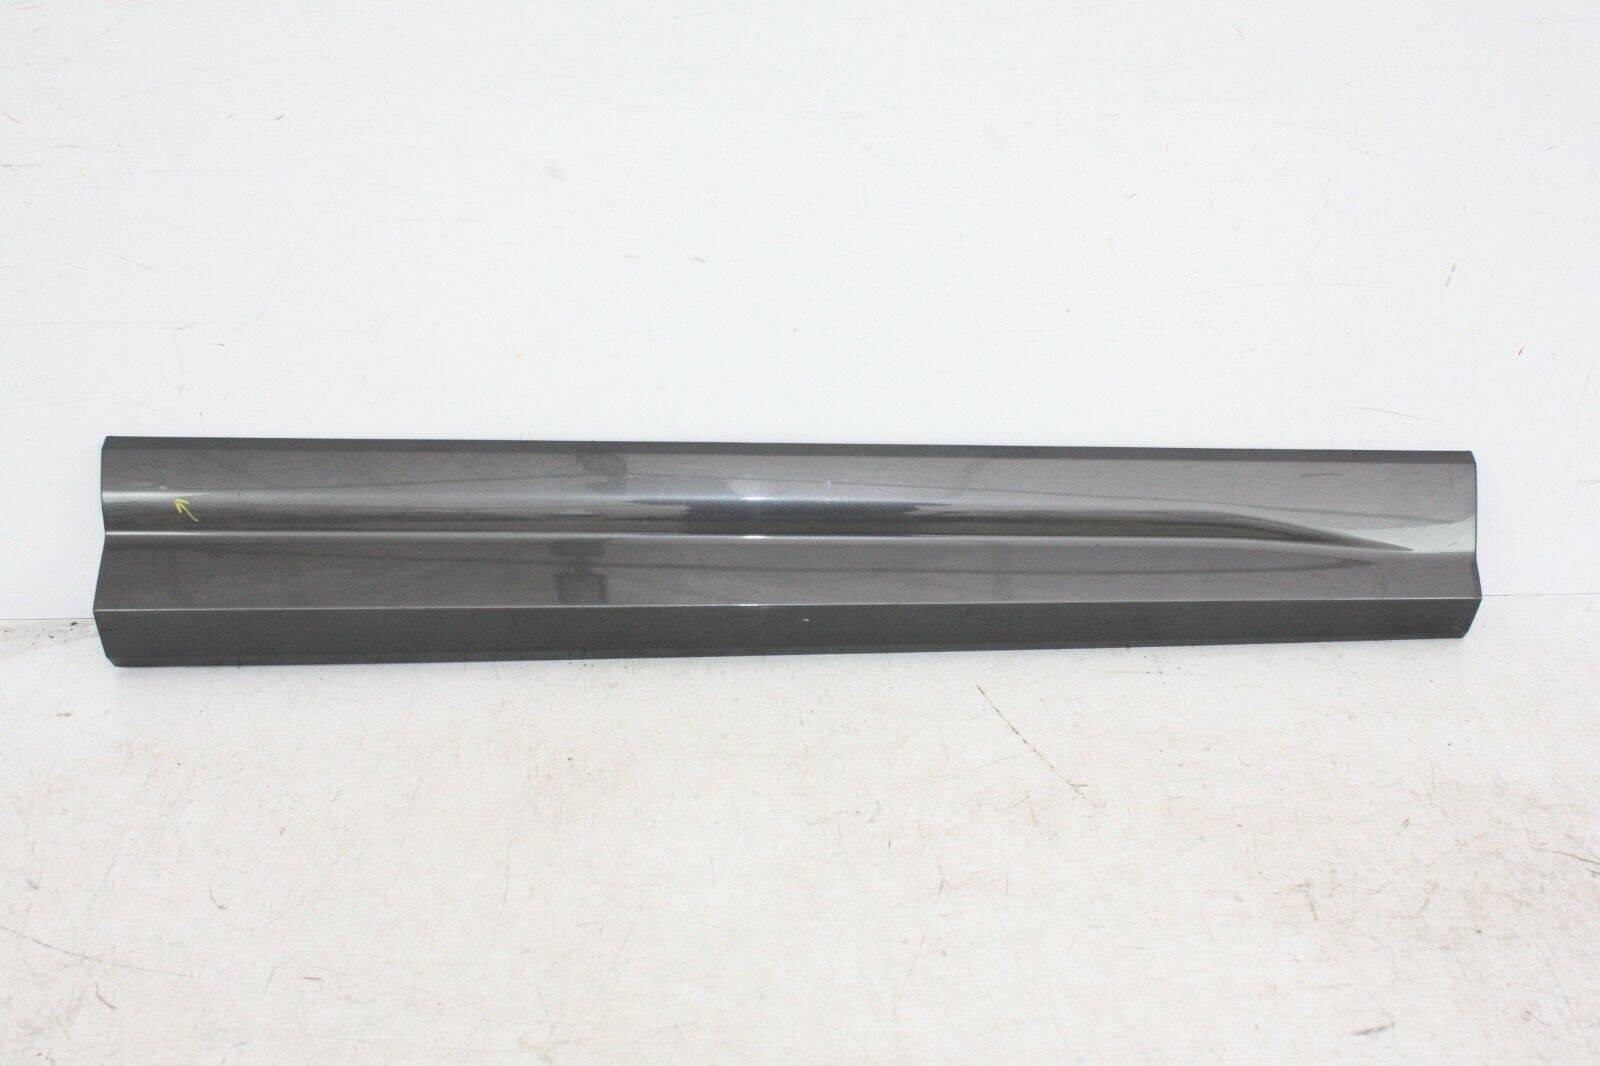 AUDI-Q2-S-LINE-FRONT-RIGHT-DOOR-MOULDING-2016-ONWARDS-81A853960A-GENUINE-175367537569